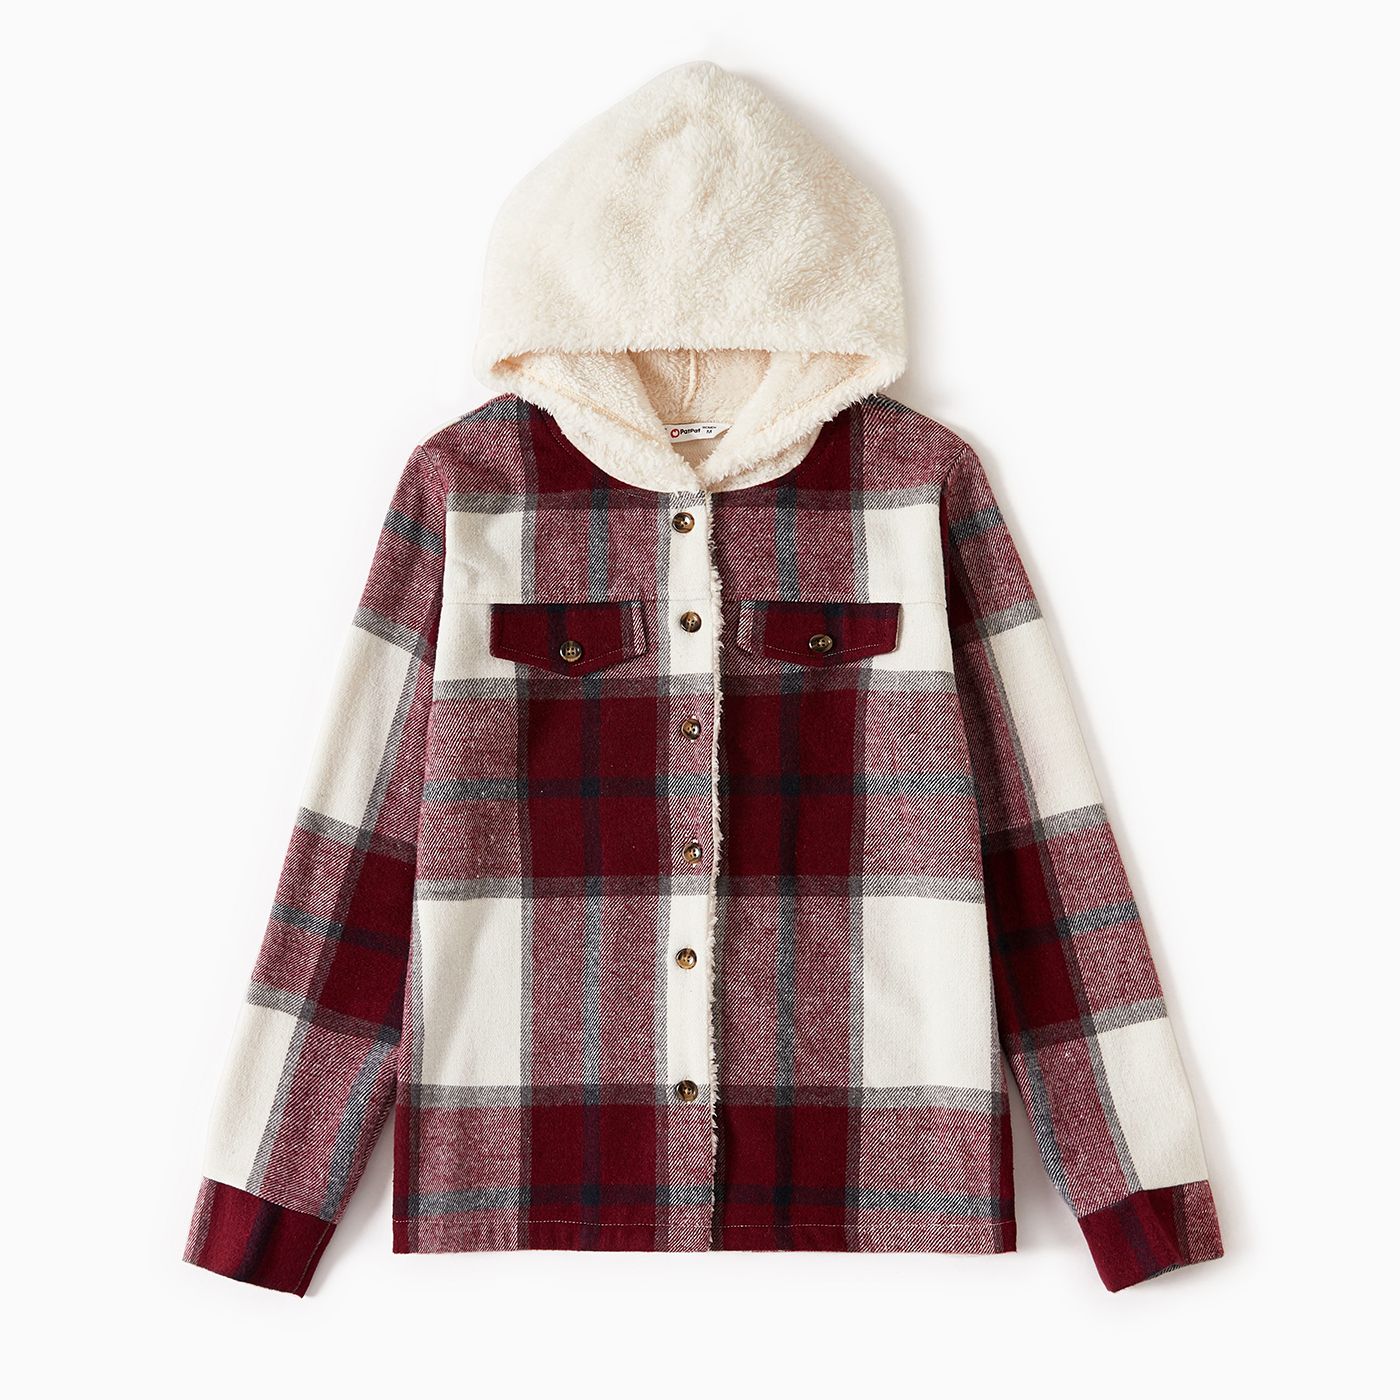 Family Matching Fleece Hooded Splicing Red Plaid Long-sleeve Outwear Tops